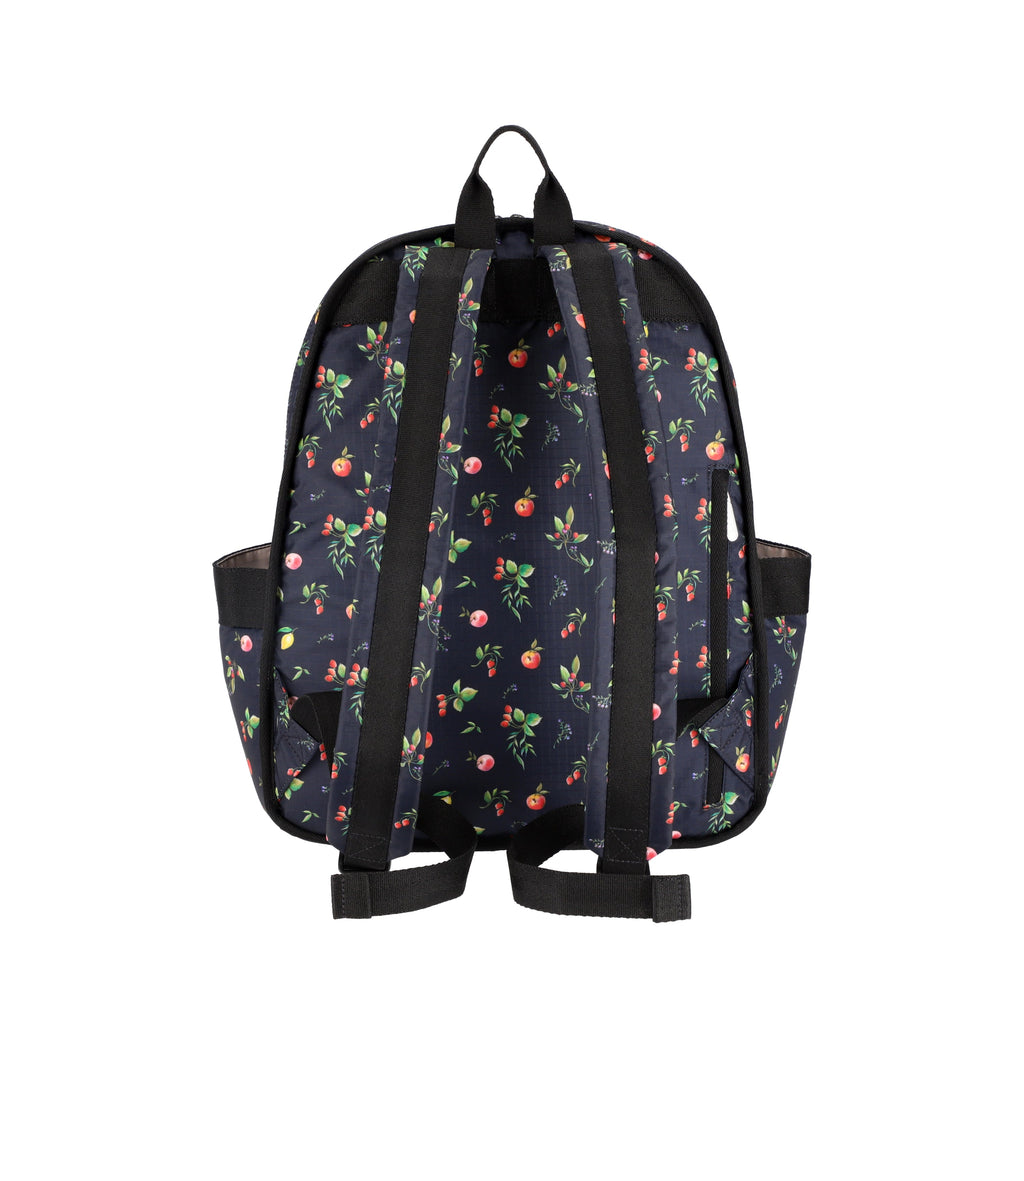 Route Backpack - 25448184184880